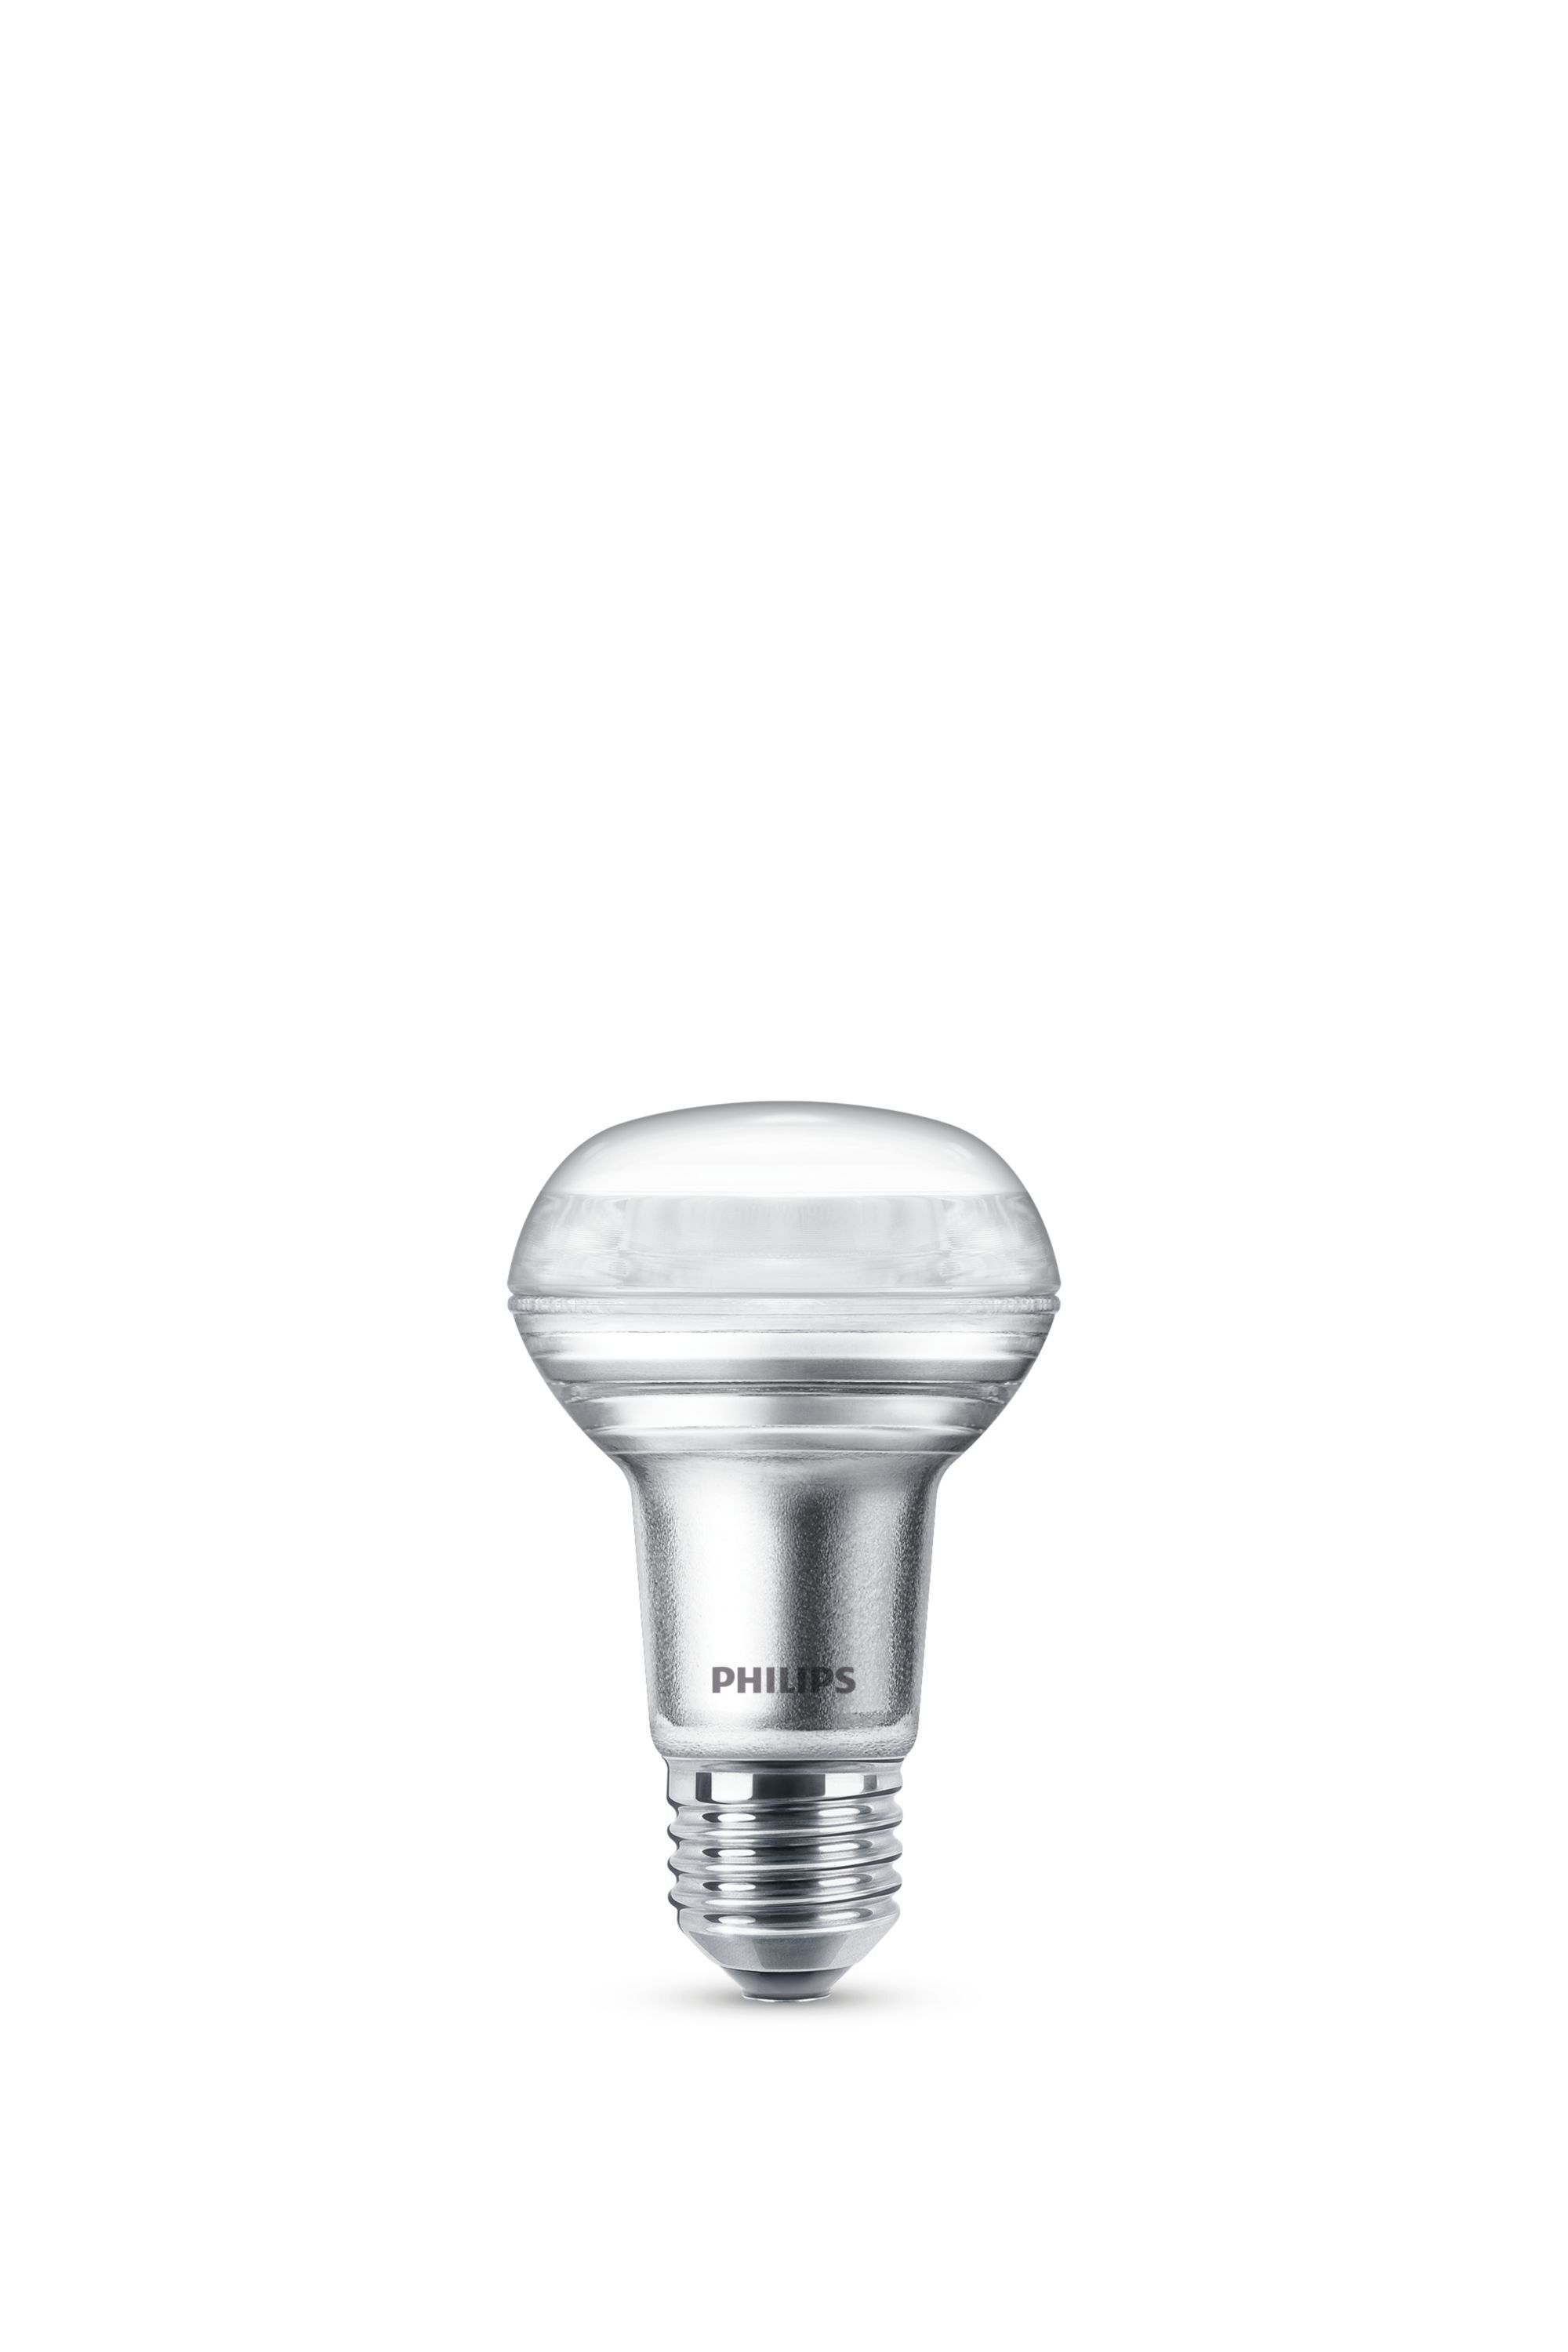 Philips 4.5W (60W) E27 Warm white Reflector (Dimmable)